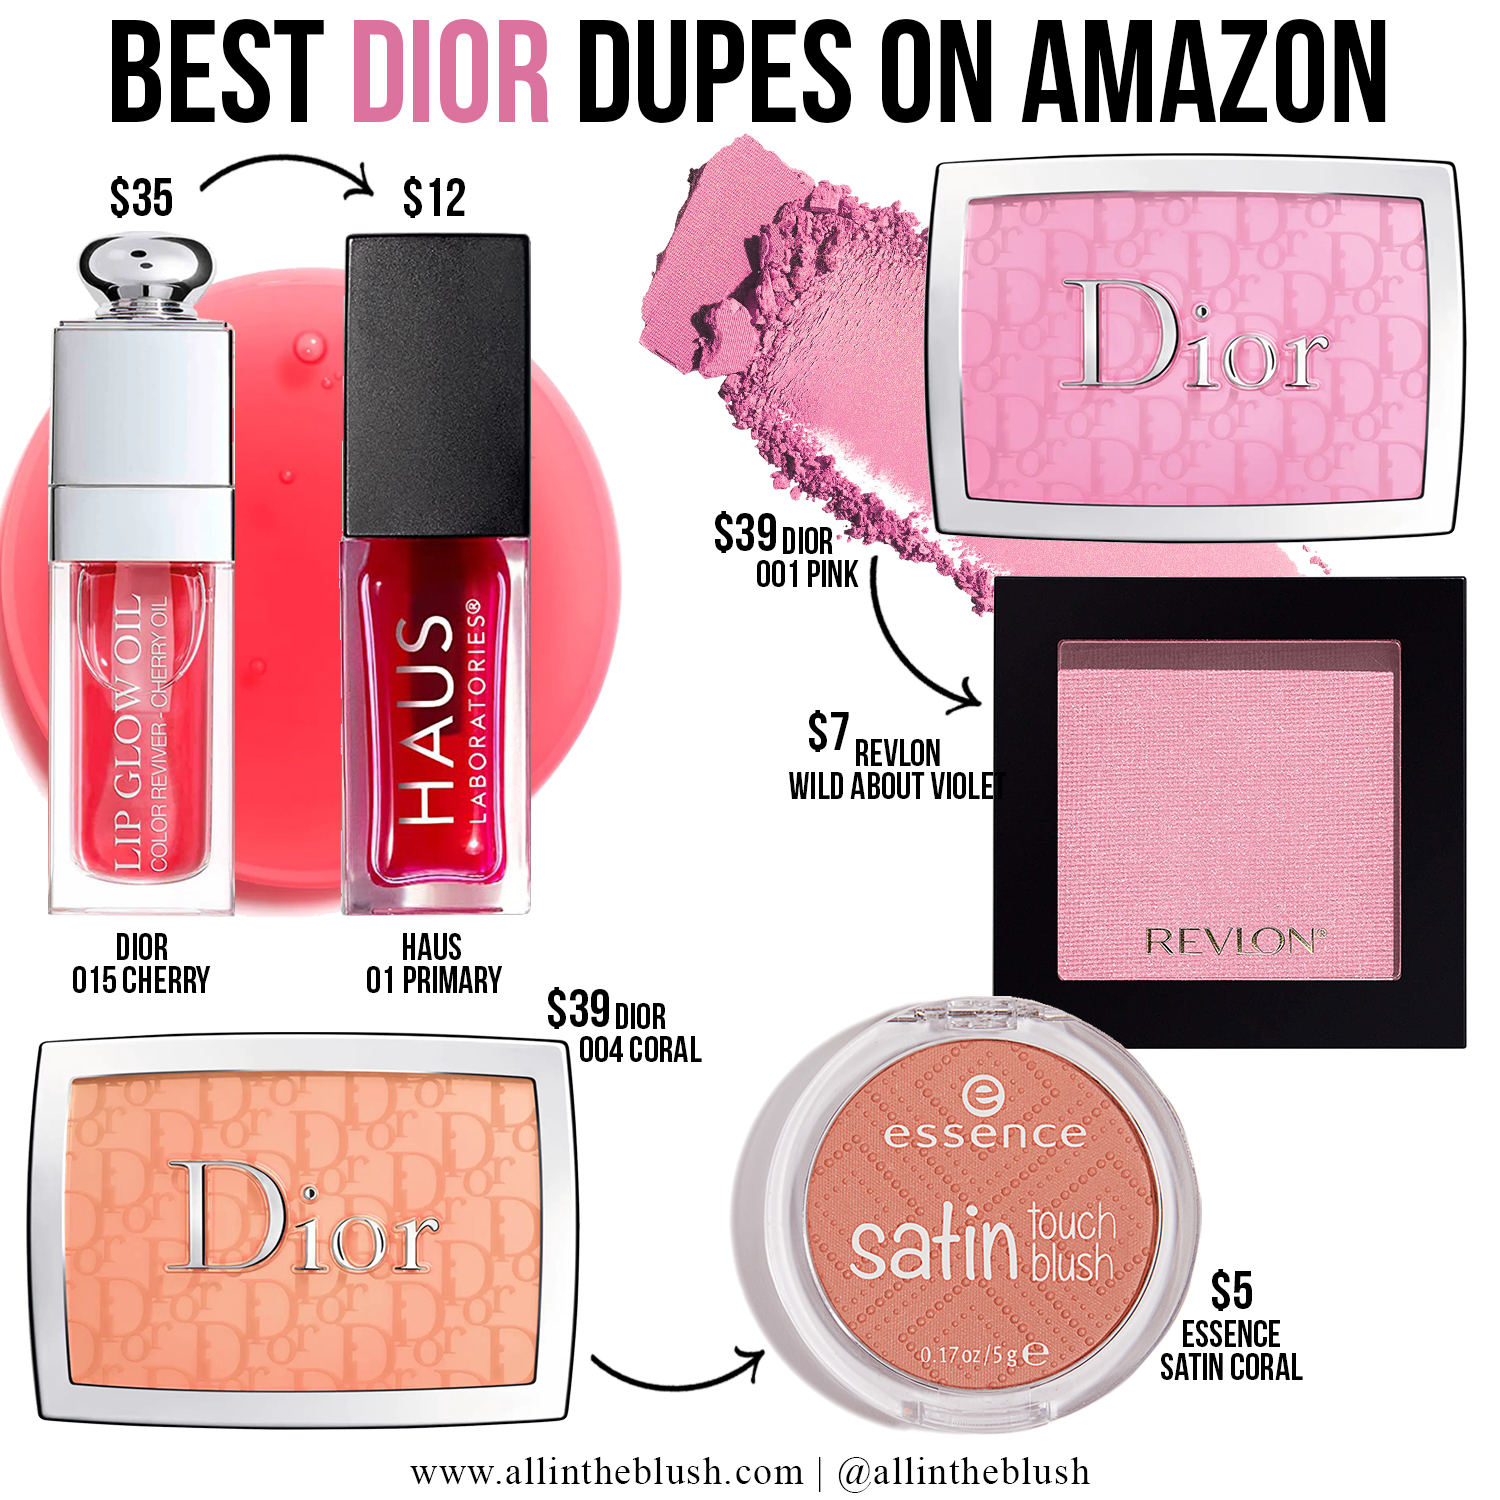 Affordable Dupes For Dior 001 Pink Blush All In The Blush | vlr.eng.br